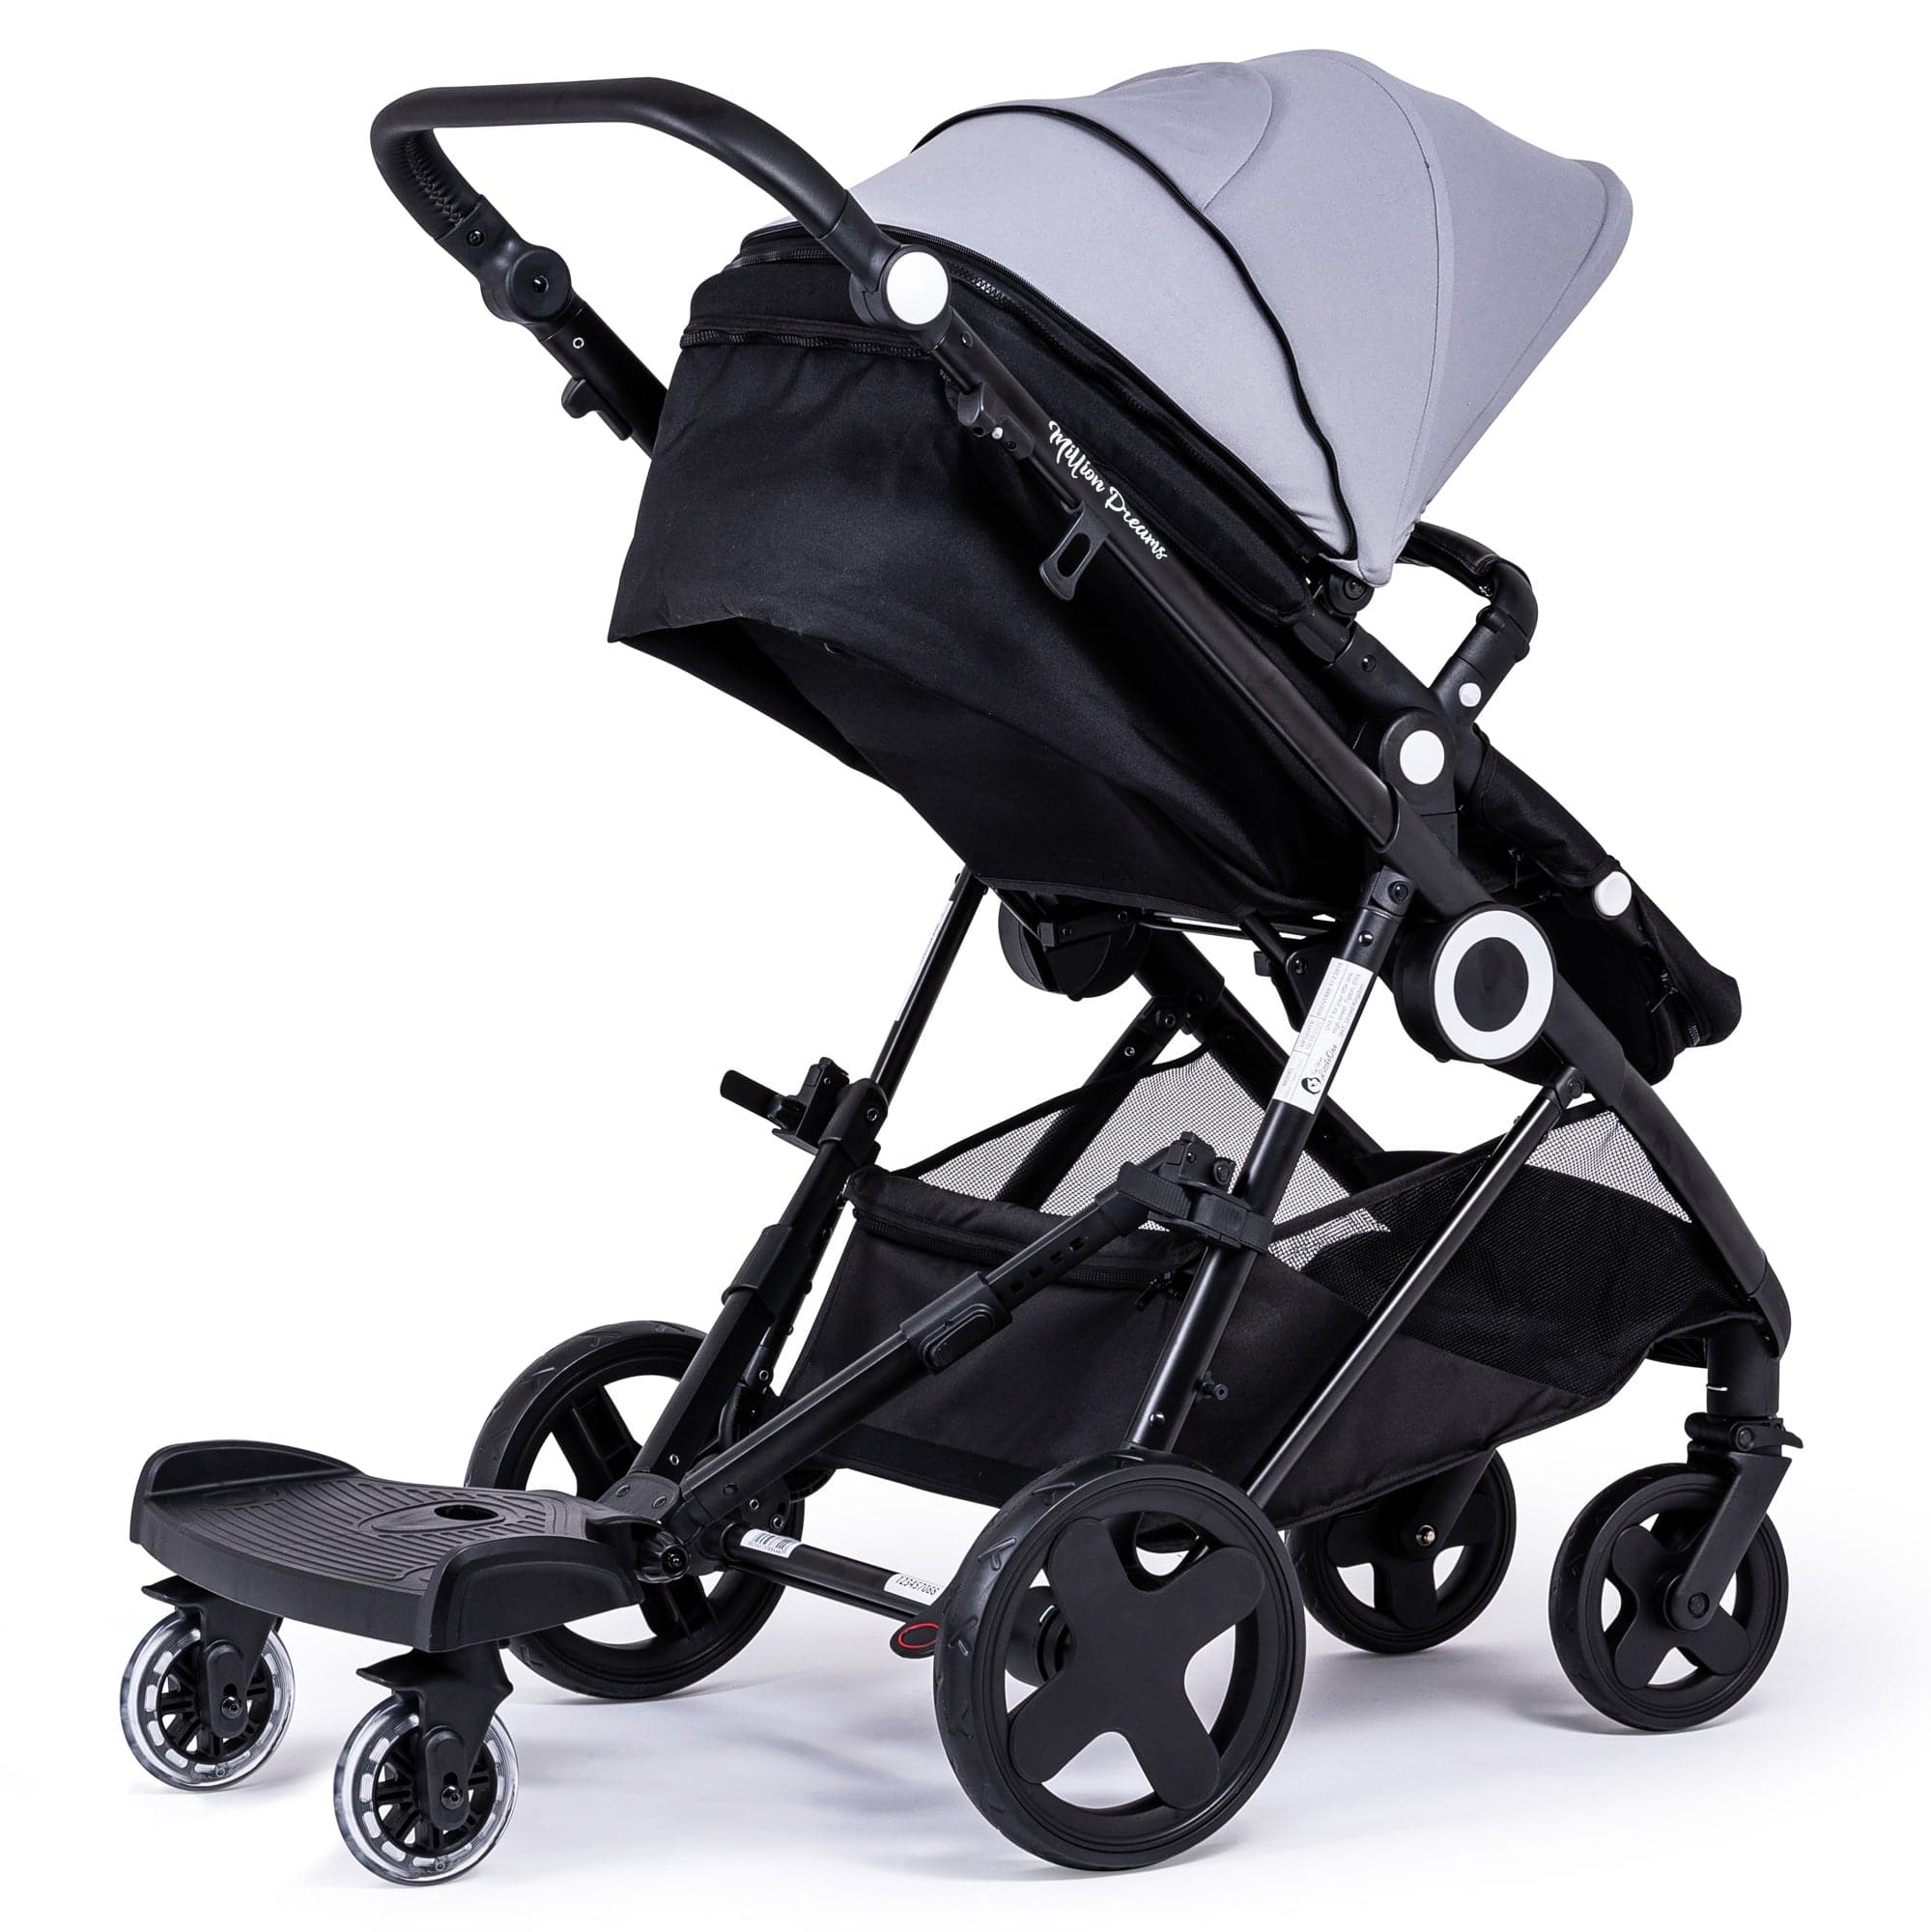 Universal Ride On Board with Seat - Compatible With Buggies / Pushchairs / Twins / Travel Systems - For Your Little One